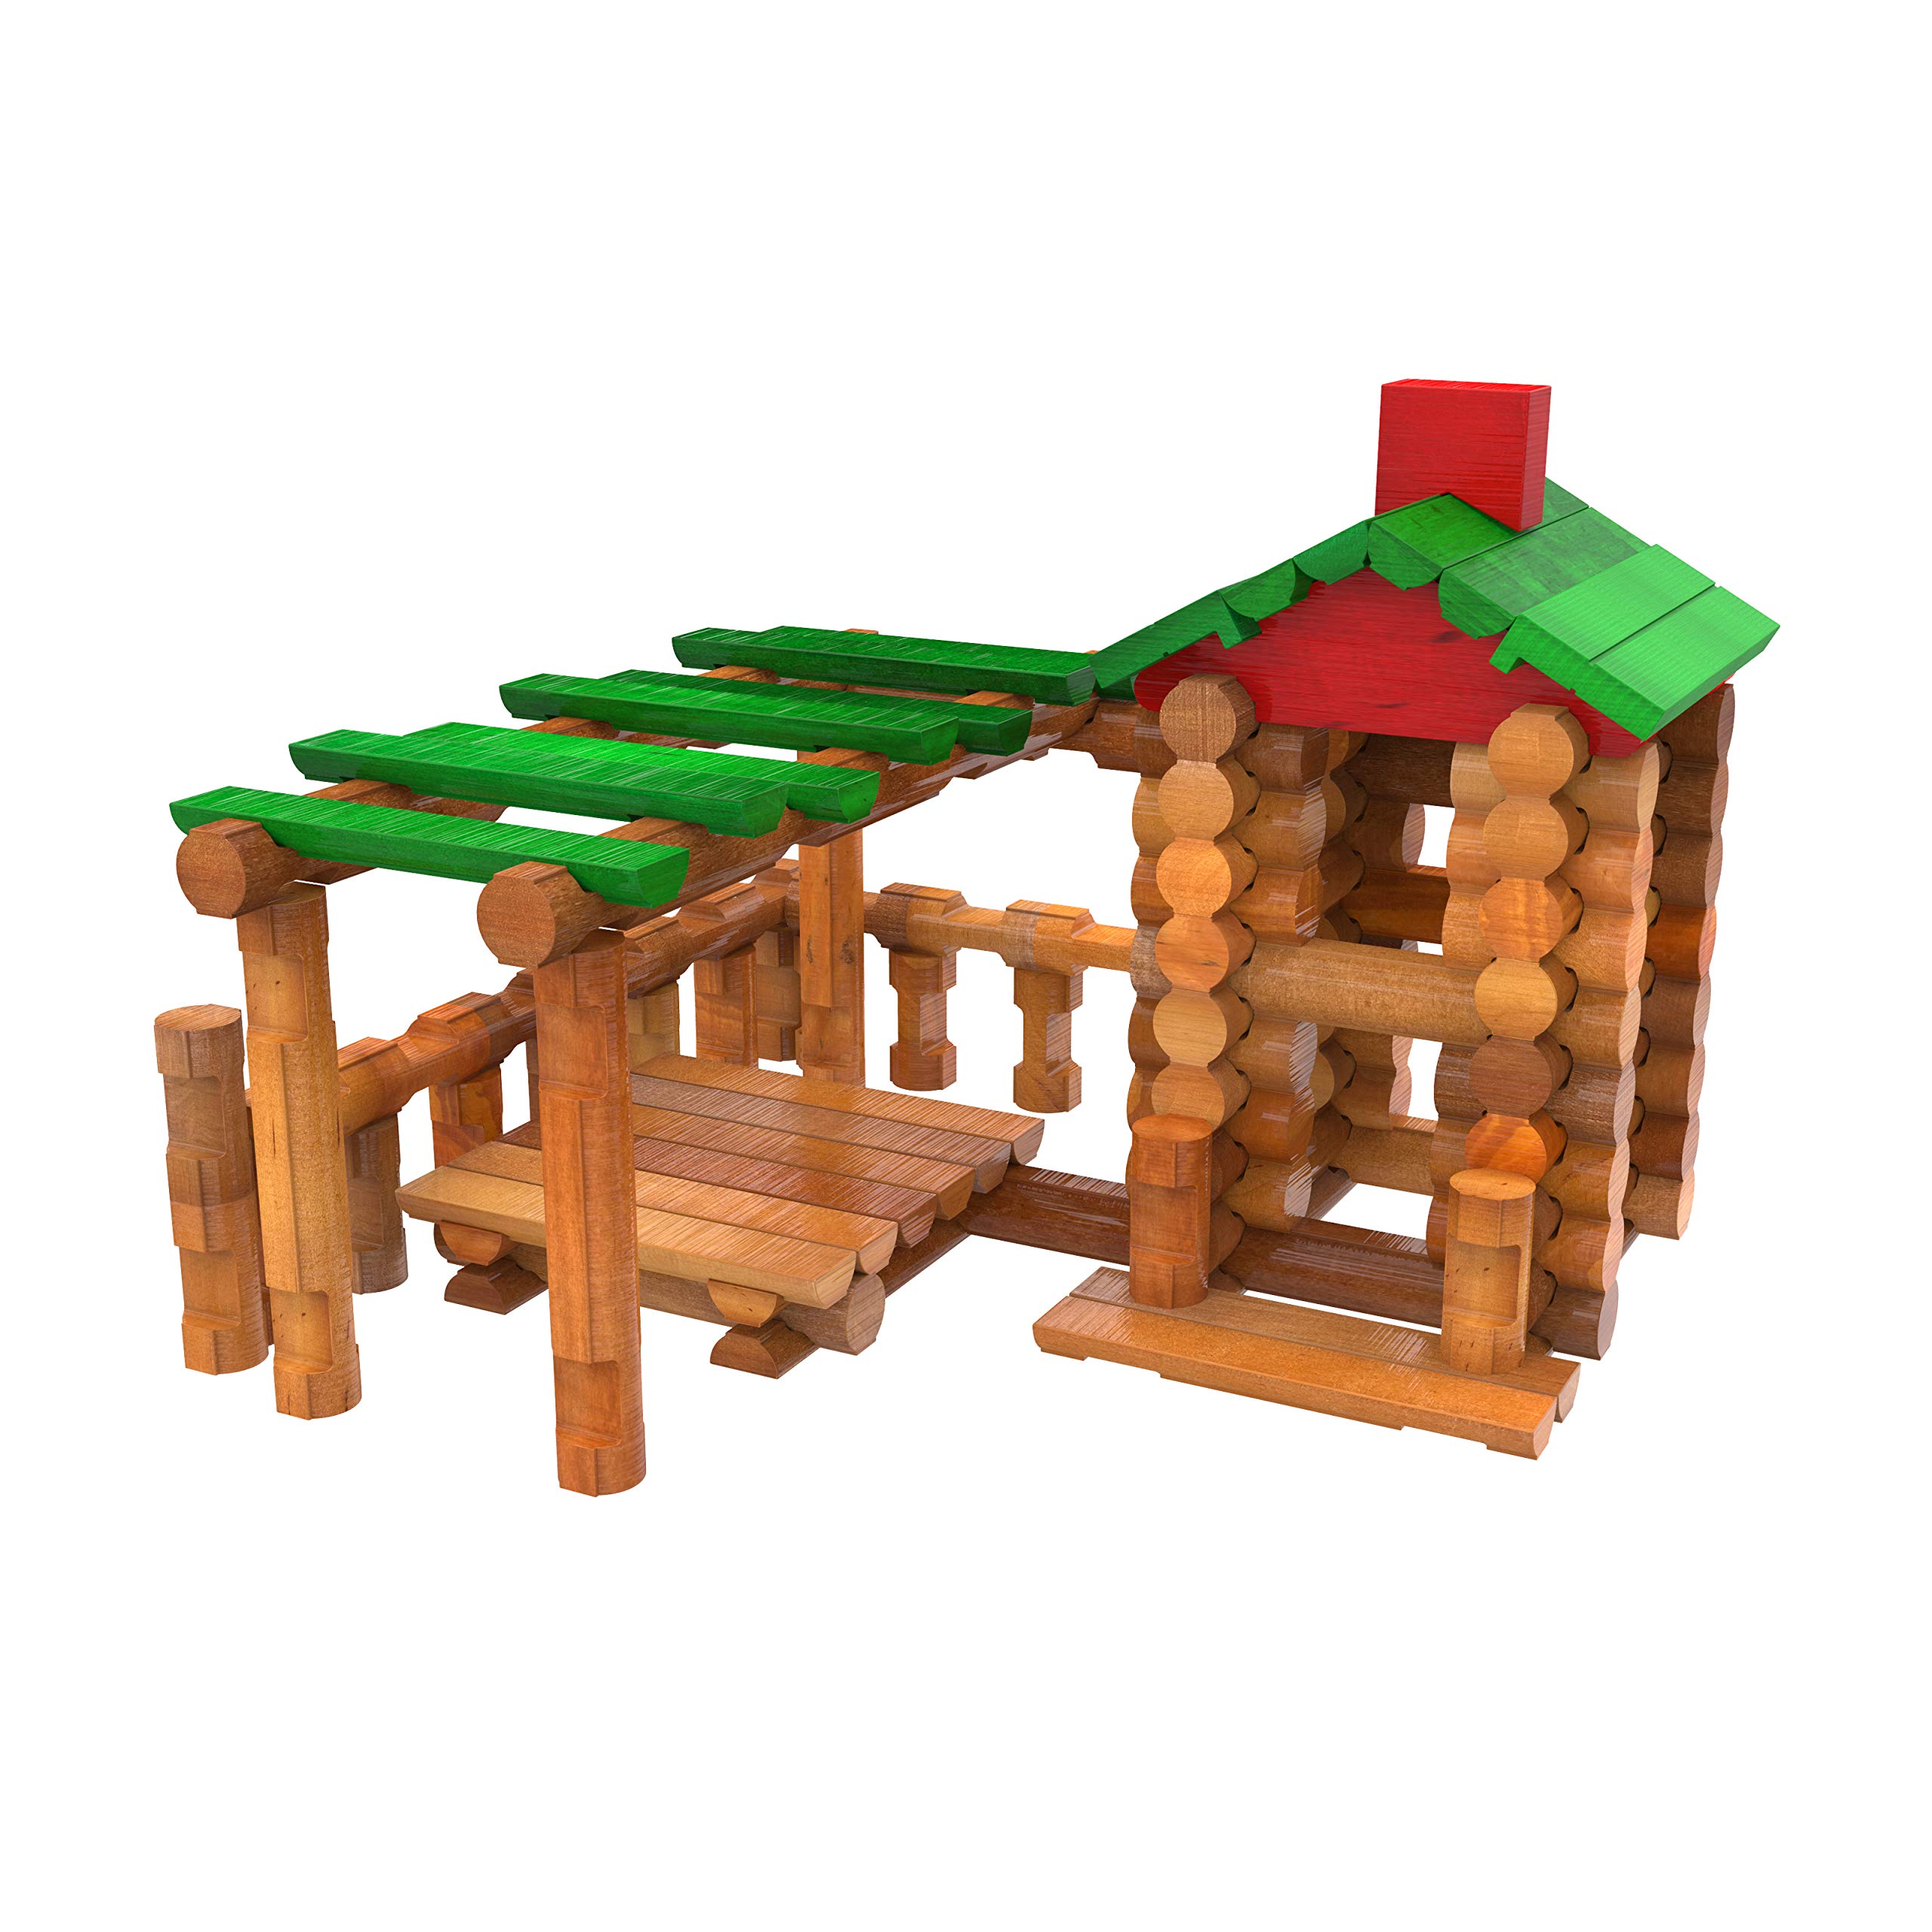 LINCOLN LOGS – Classic Meetinghouse - 117 Parts - Real Wood Logs - Ages 3+ - Collectible Tin - Best Retro Building Gift Set for Boys/Girls – Creative Construction Engineering – Preschool Education Toy